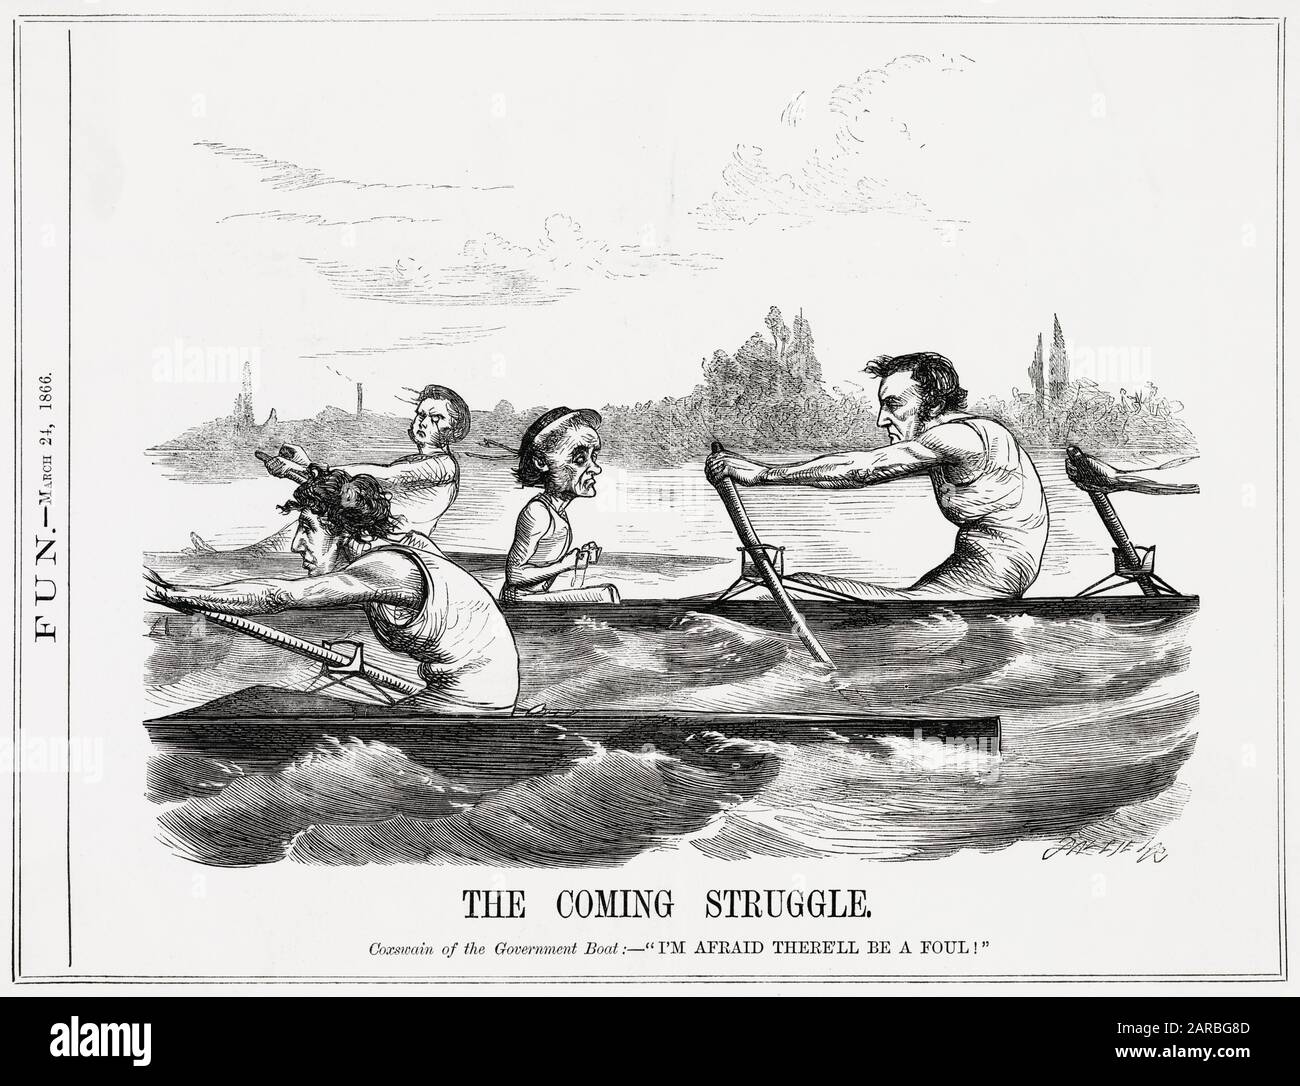 Cartoon, The Coming Struggle -- using the Boat Race as an analogy for politics, Disraeli and Gladstone are depicted as rowers in competing boats, with the radical MP John Bright in a separate boat in the background. Lord John Russell is with Gladstone as the Coxswain of the Government (Liberal) boat. The main issue being debated at the time was electoral reform.      Date: 1866 Stock Photo